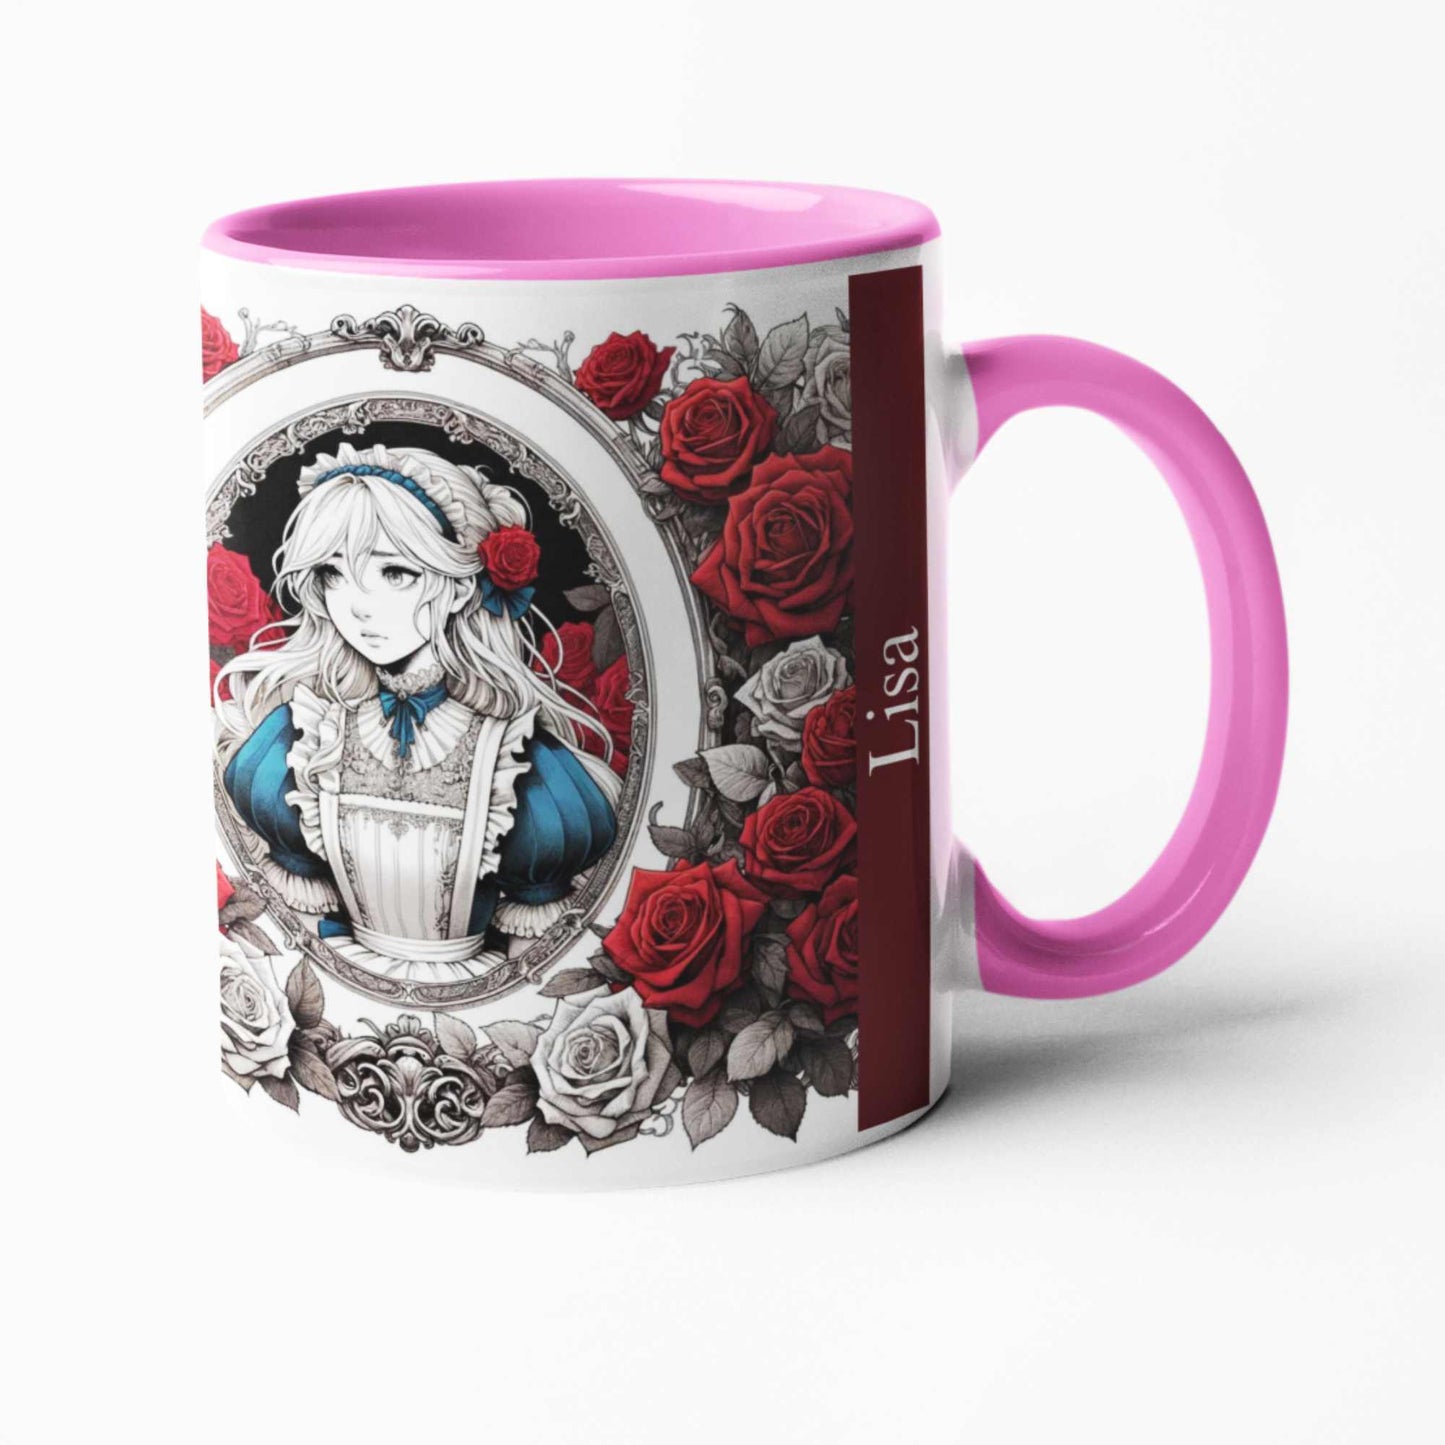 Alice in Wonderland Mug and Coaster, Personalised Mug, Personalised Coaster, Birthday Mug, Tea Cup, Gift for Friend, Gift for Her